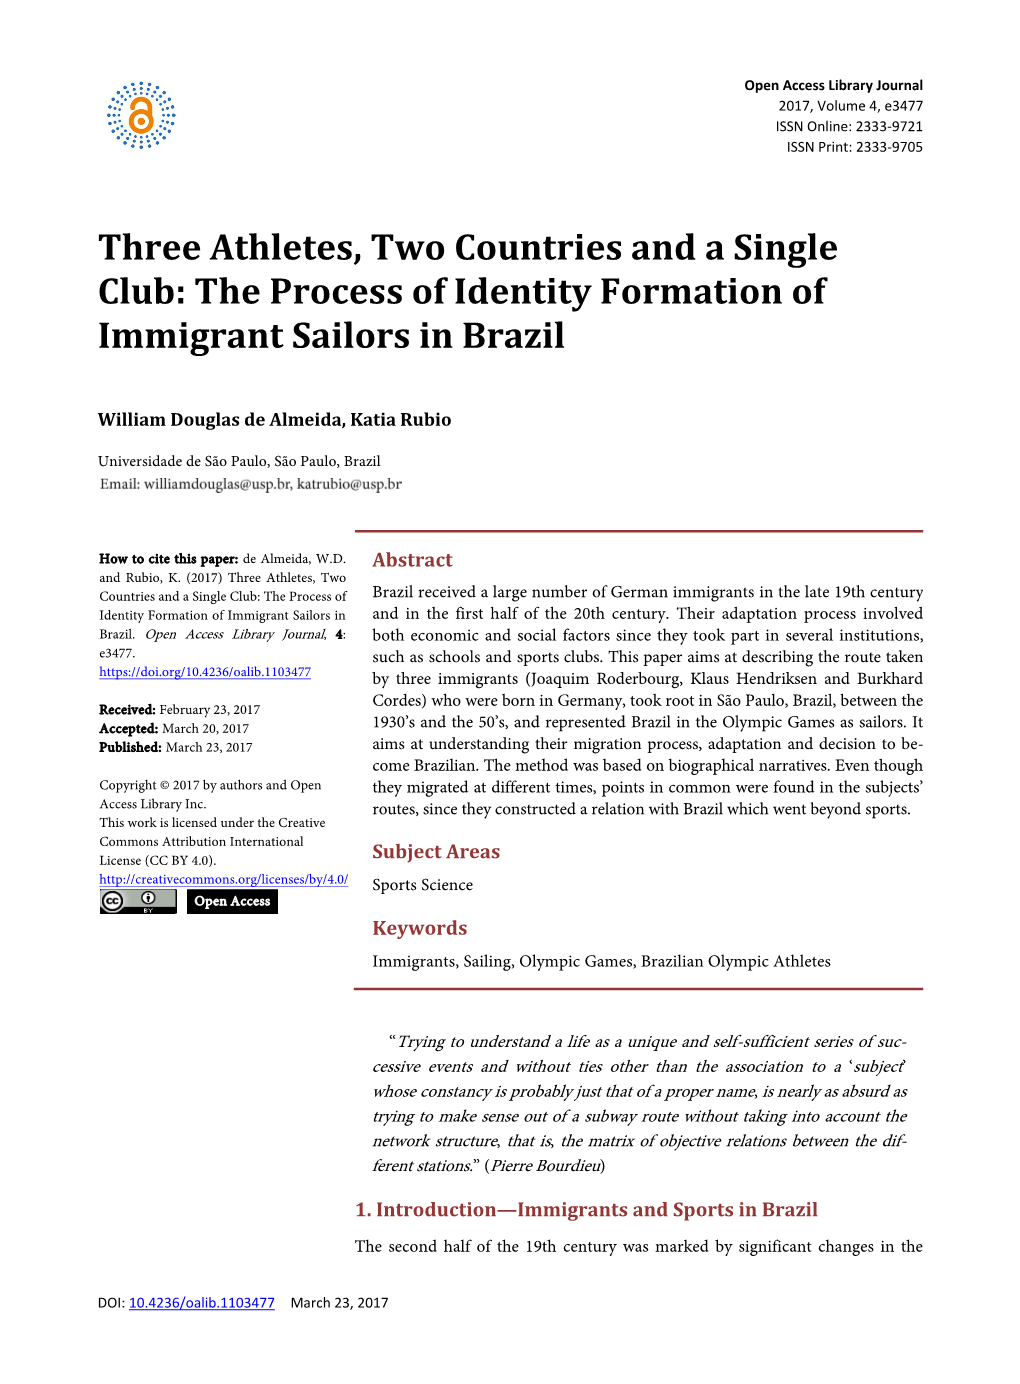 Three Athletes, Two Countries and a Single Club: the Process of Identity Formation of Immigrant Sailors in Brazil